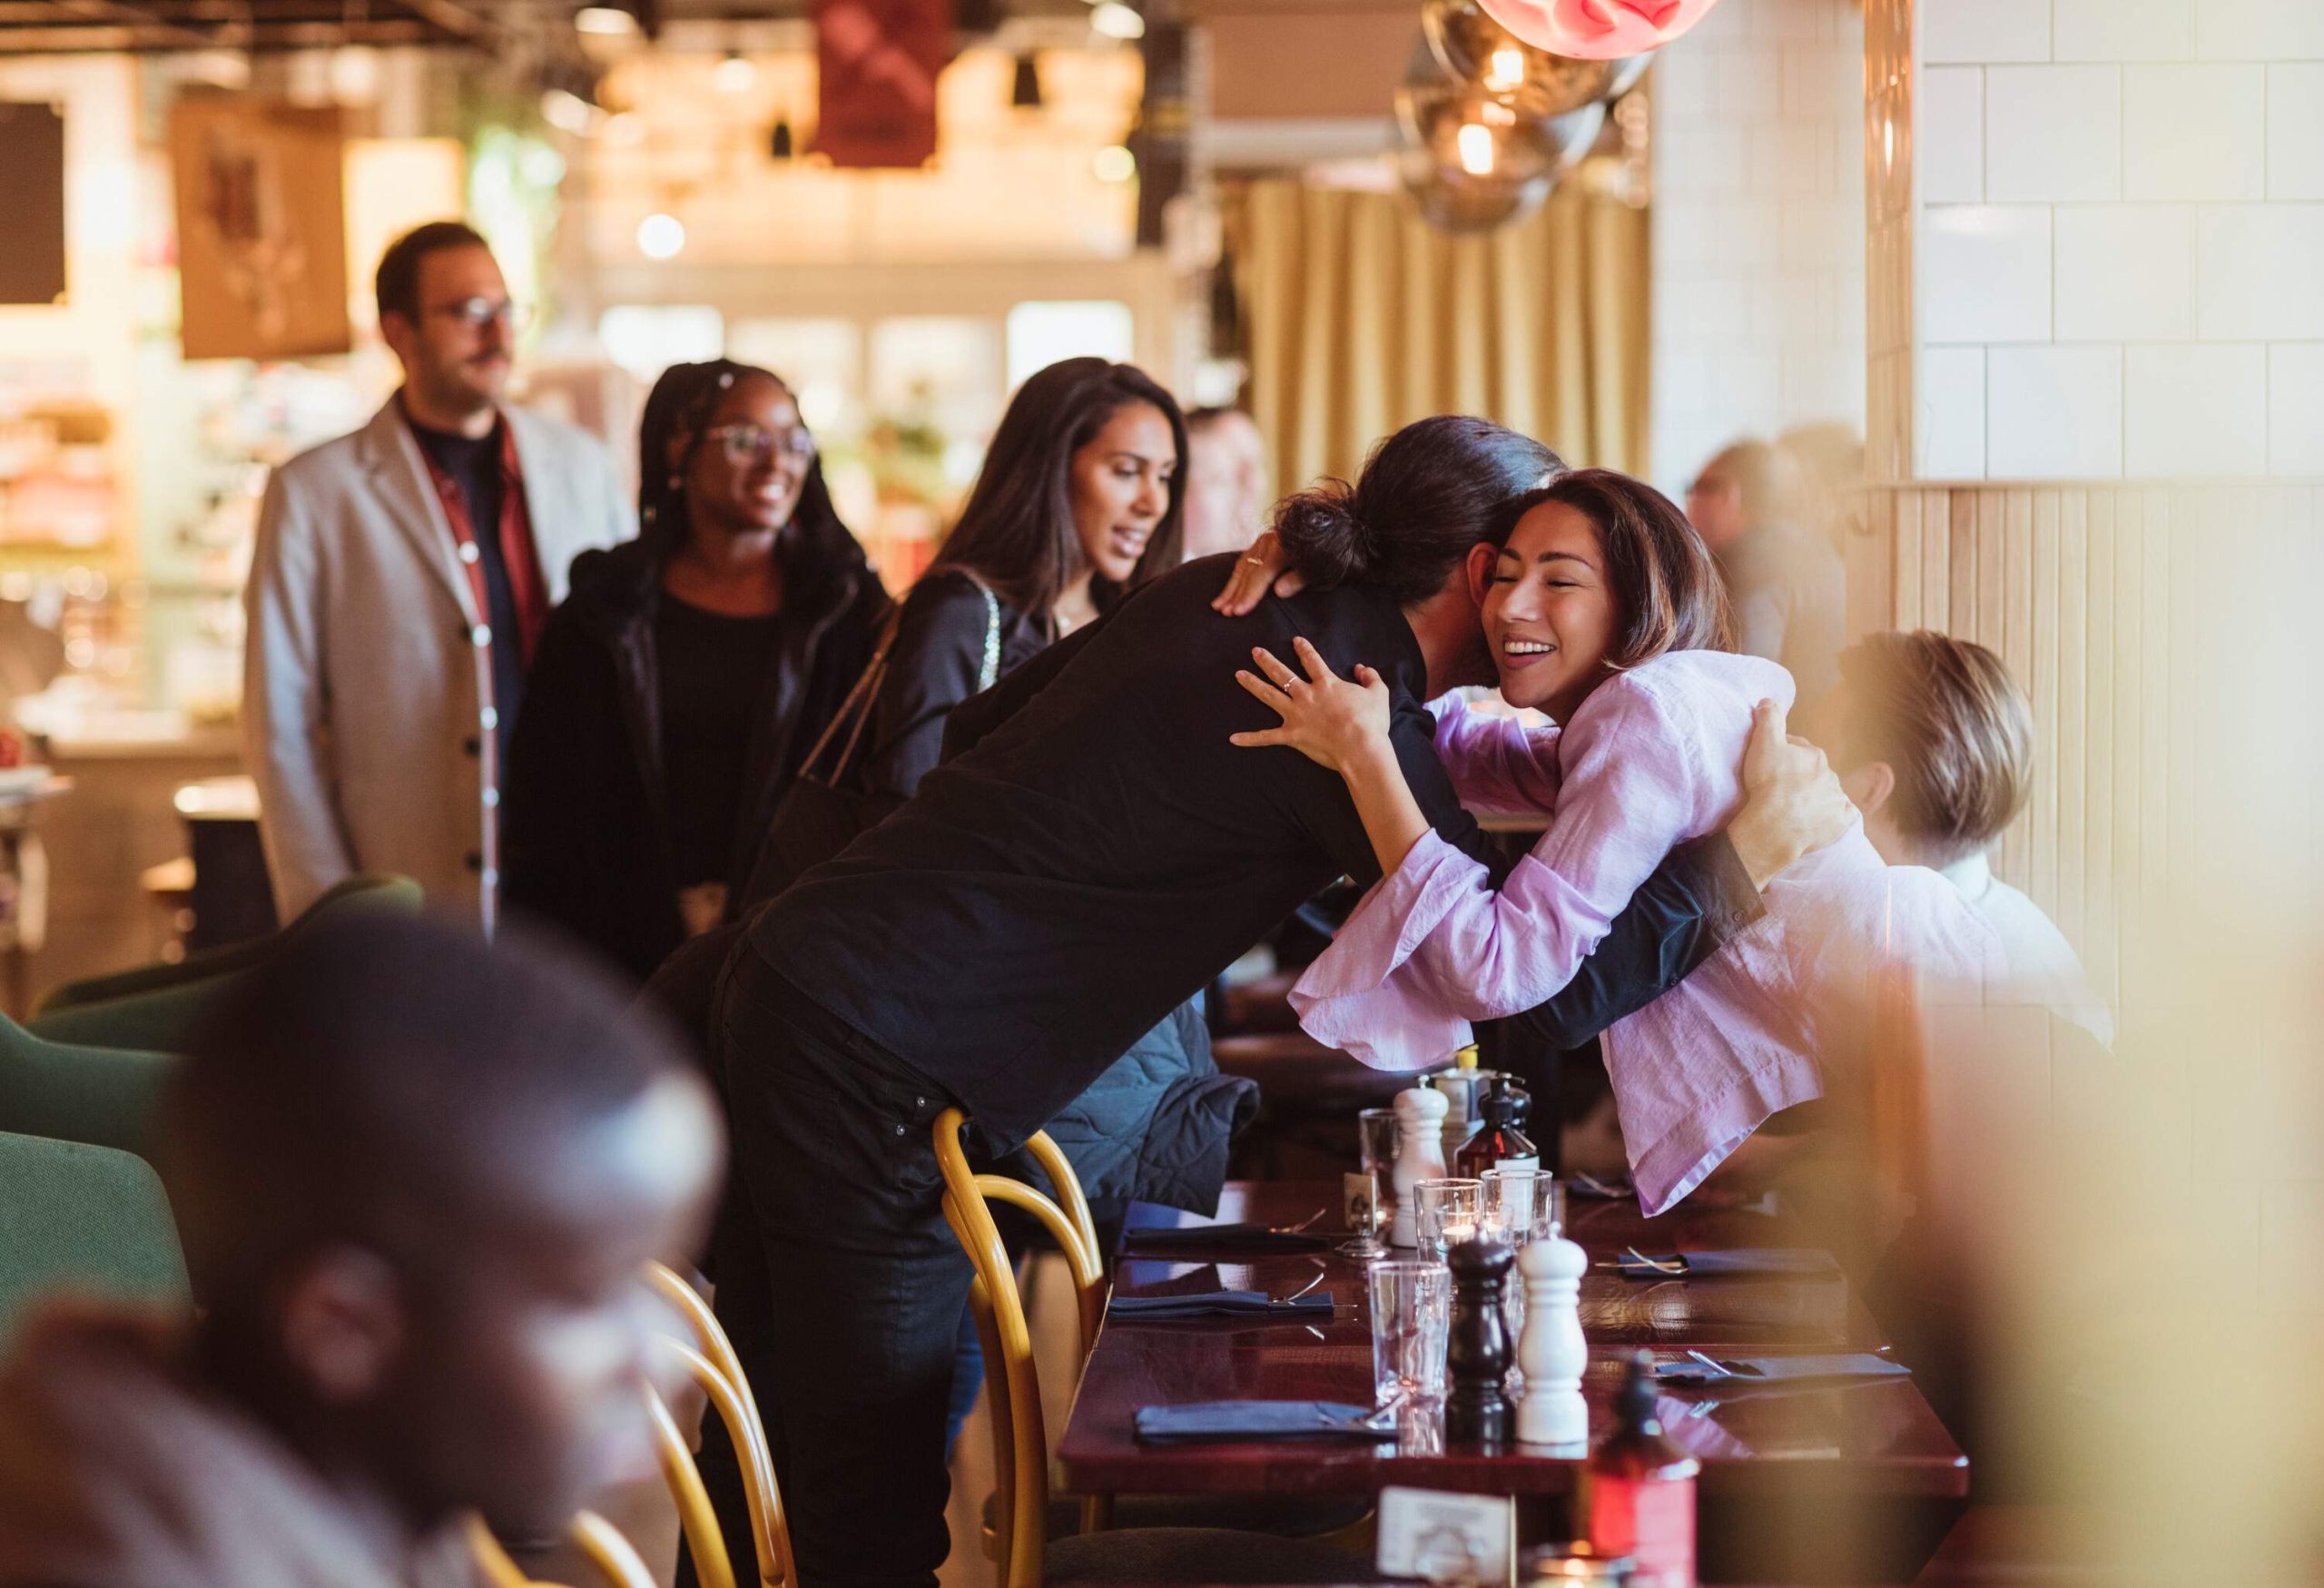 A circle of male and females friends hugs upon arriving at the restaurant.